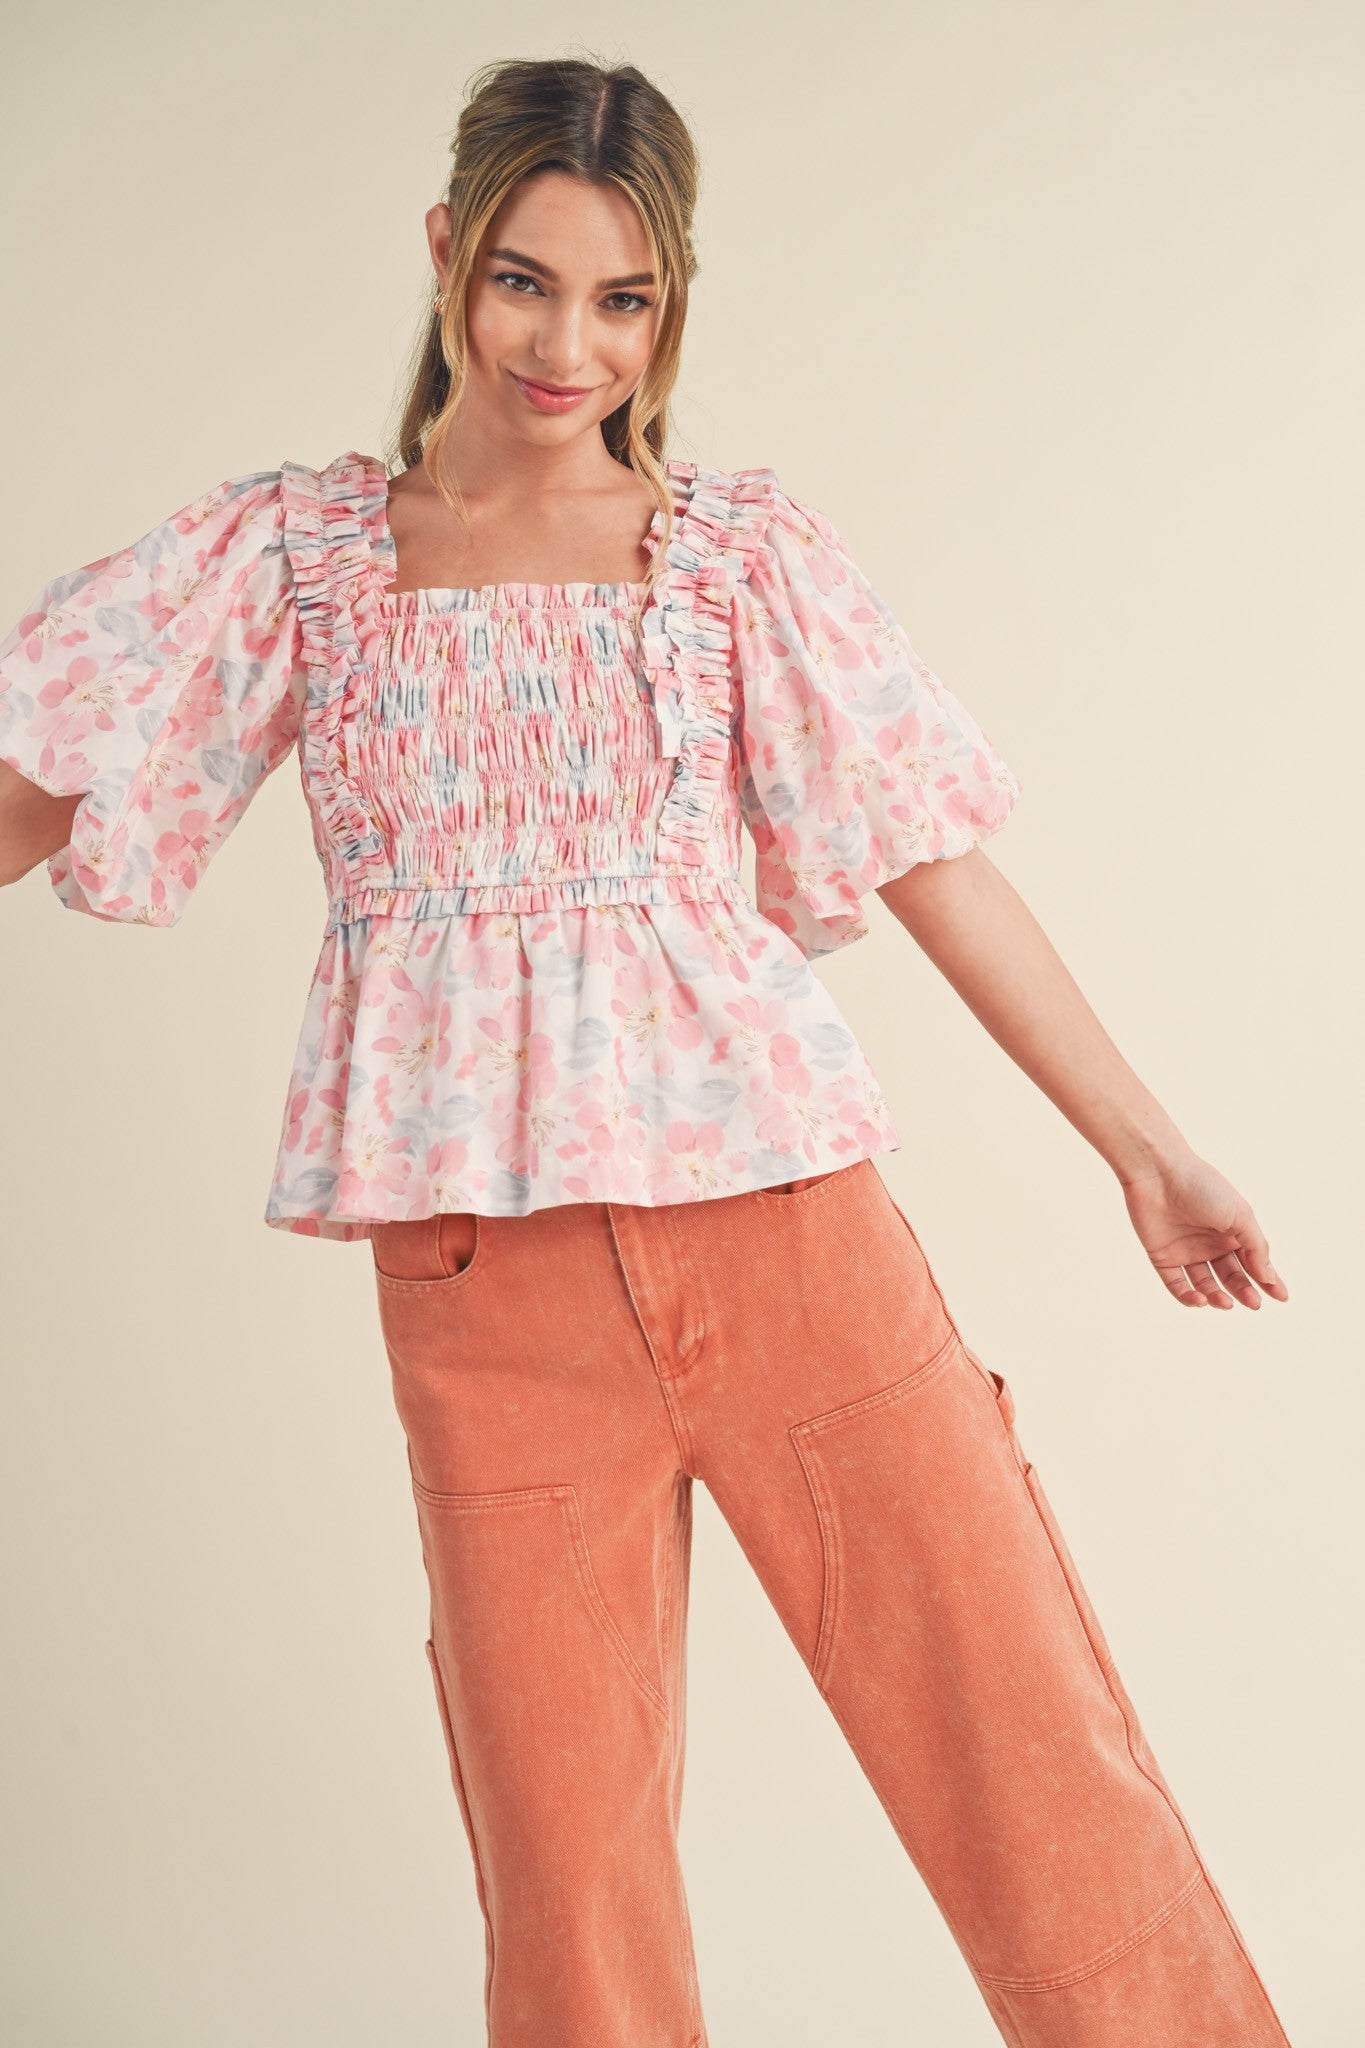 The Everly Smocked Ruffle Top